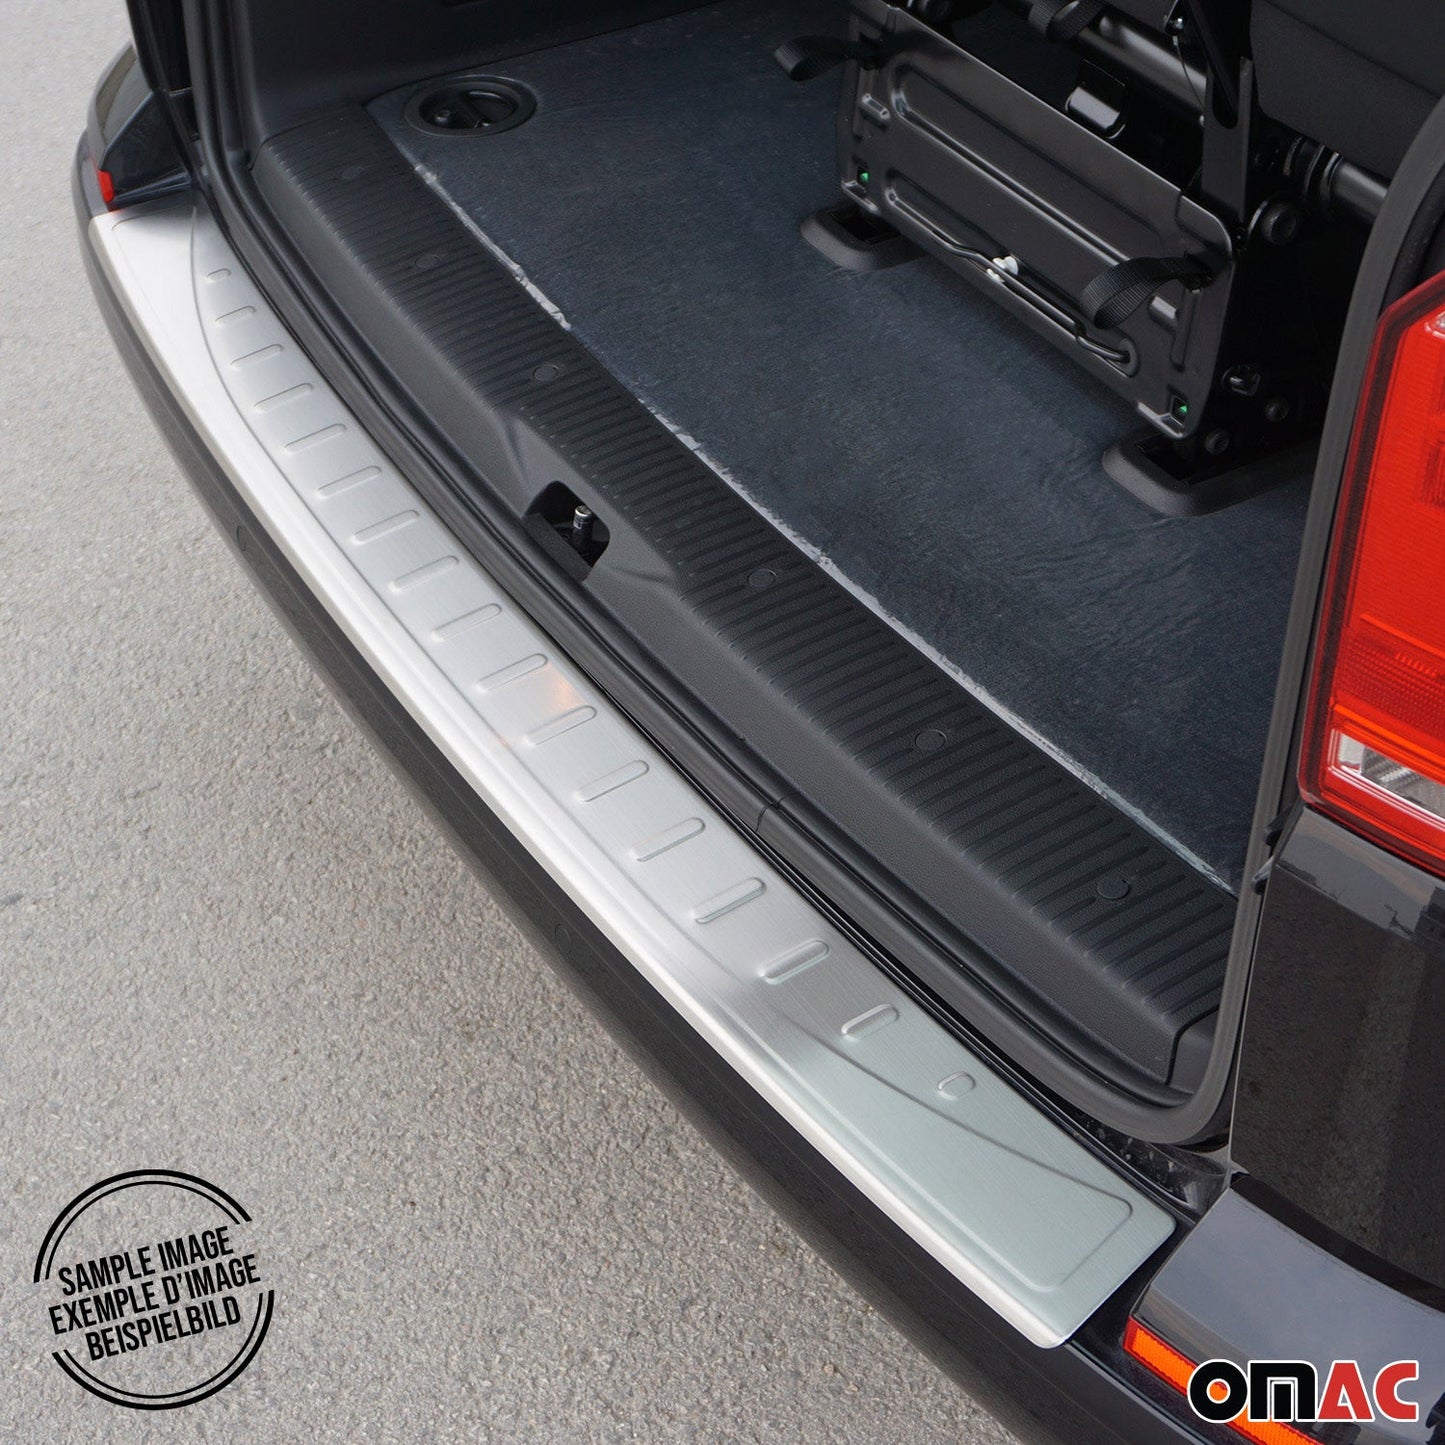 OMAC Rear Bumper Sill Cover Protector for Mitsubishi Outlander 2011-13 Brushed Steel 4907093T